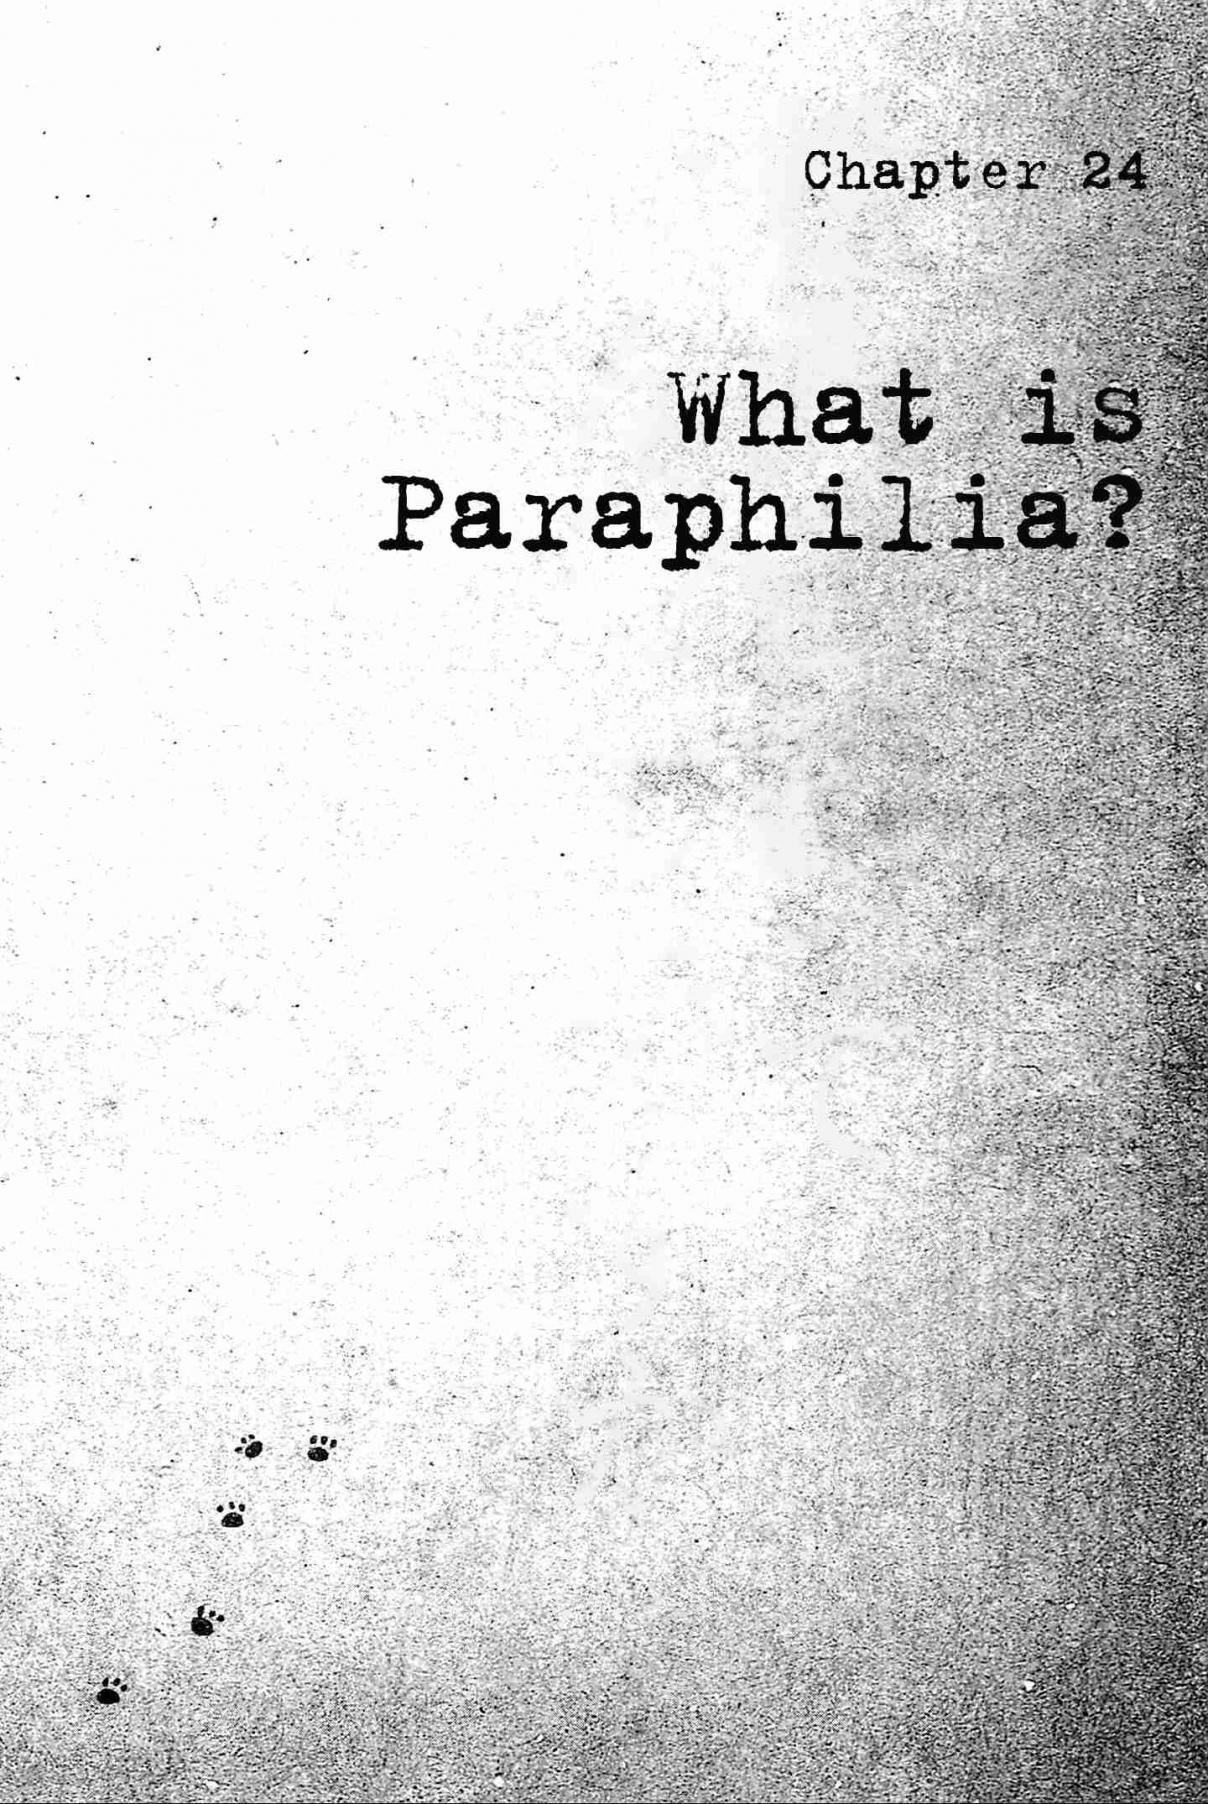 Guns and Stamps Vol. 4 Ch. 24 What is Paraphilia?